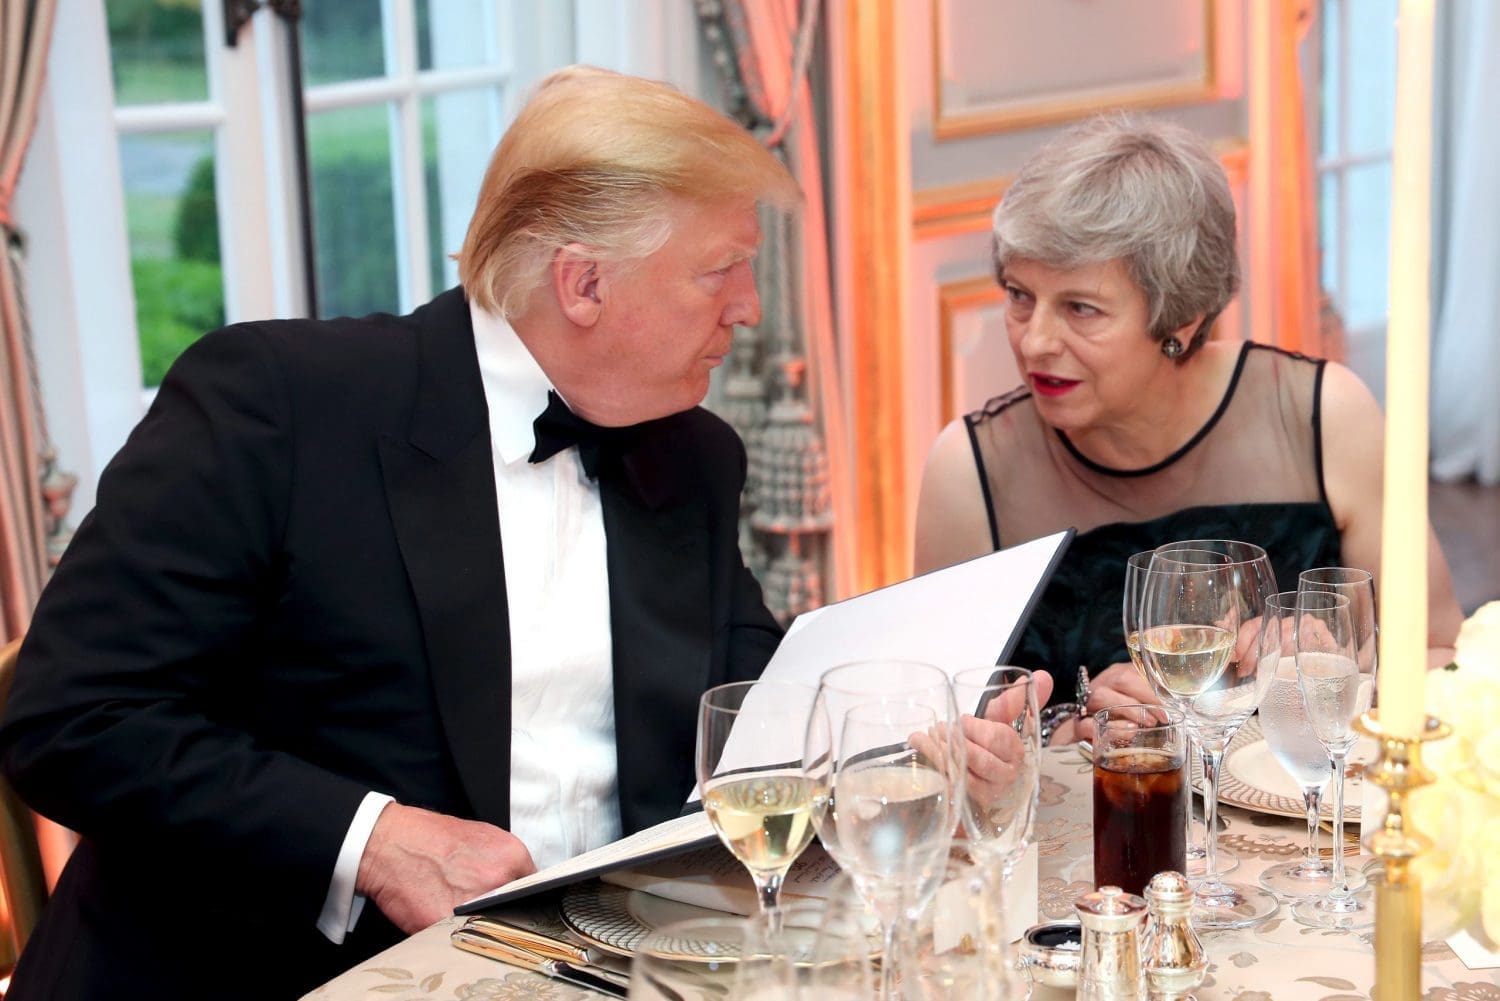 Donald Trump and Theresa May sitting at a black tie event